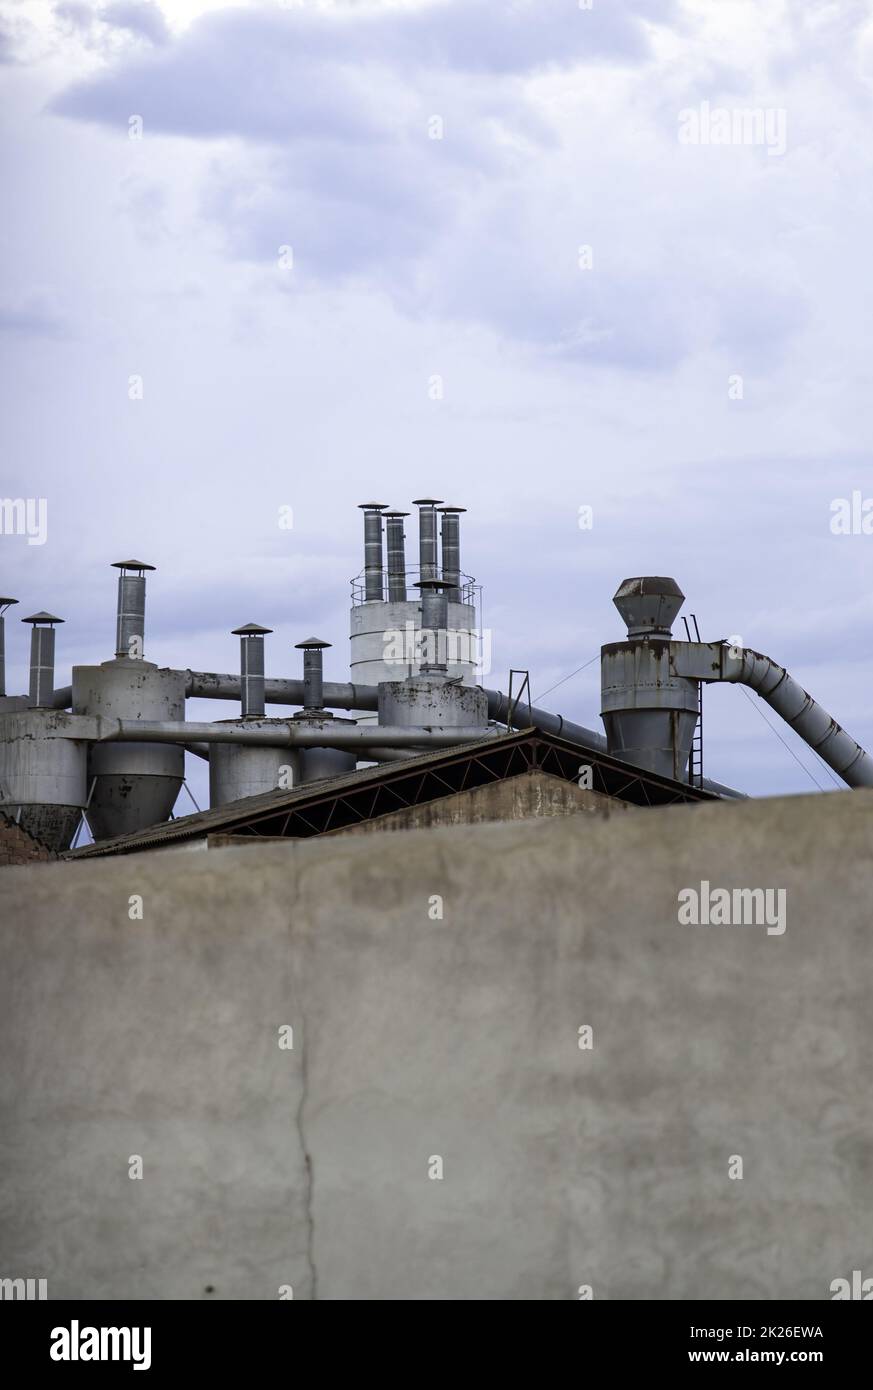 Detail of a factory in an industrial area of the city Stock Photo